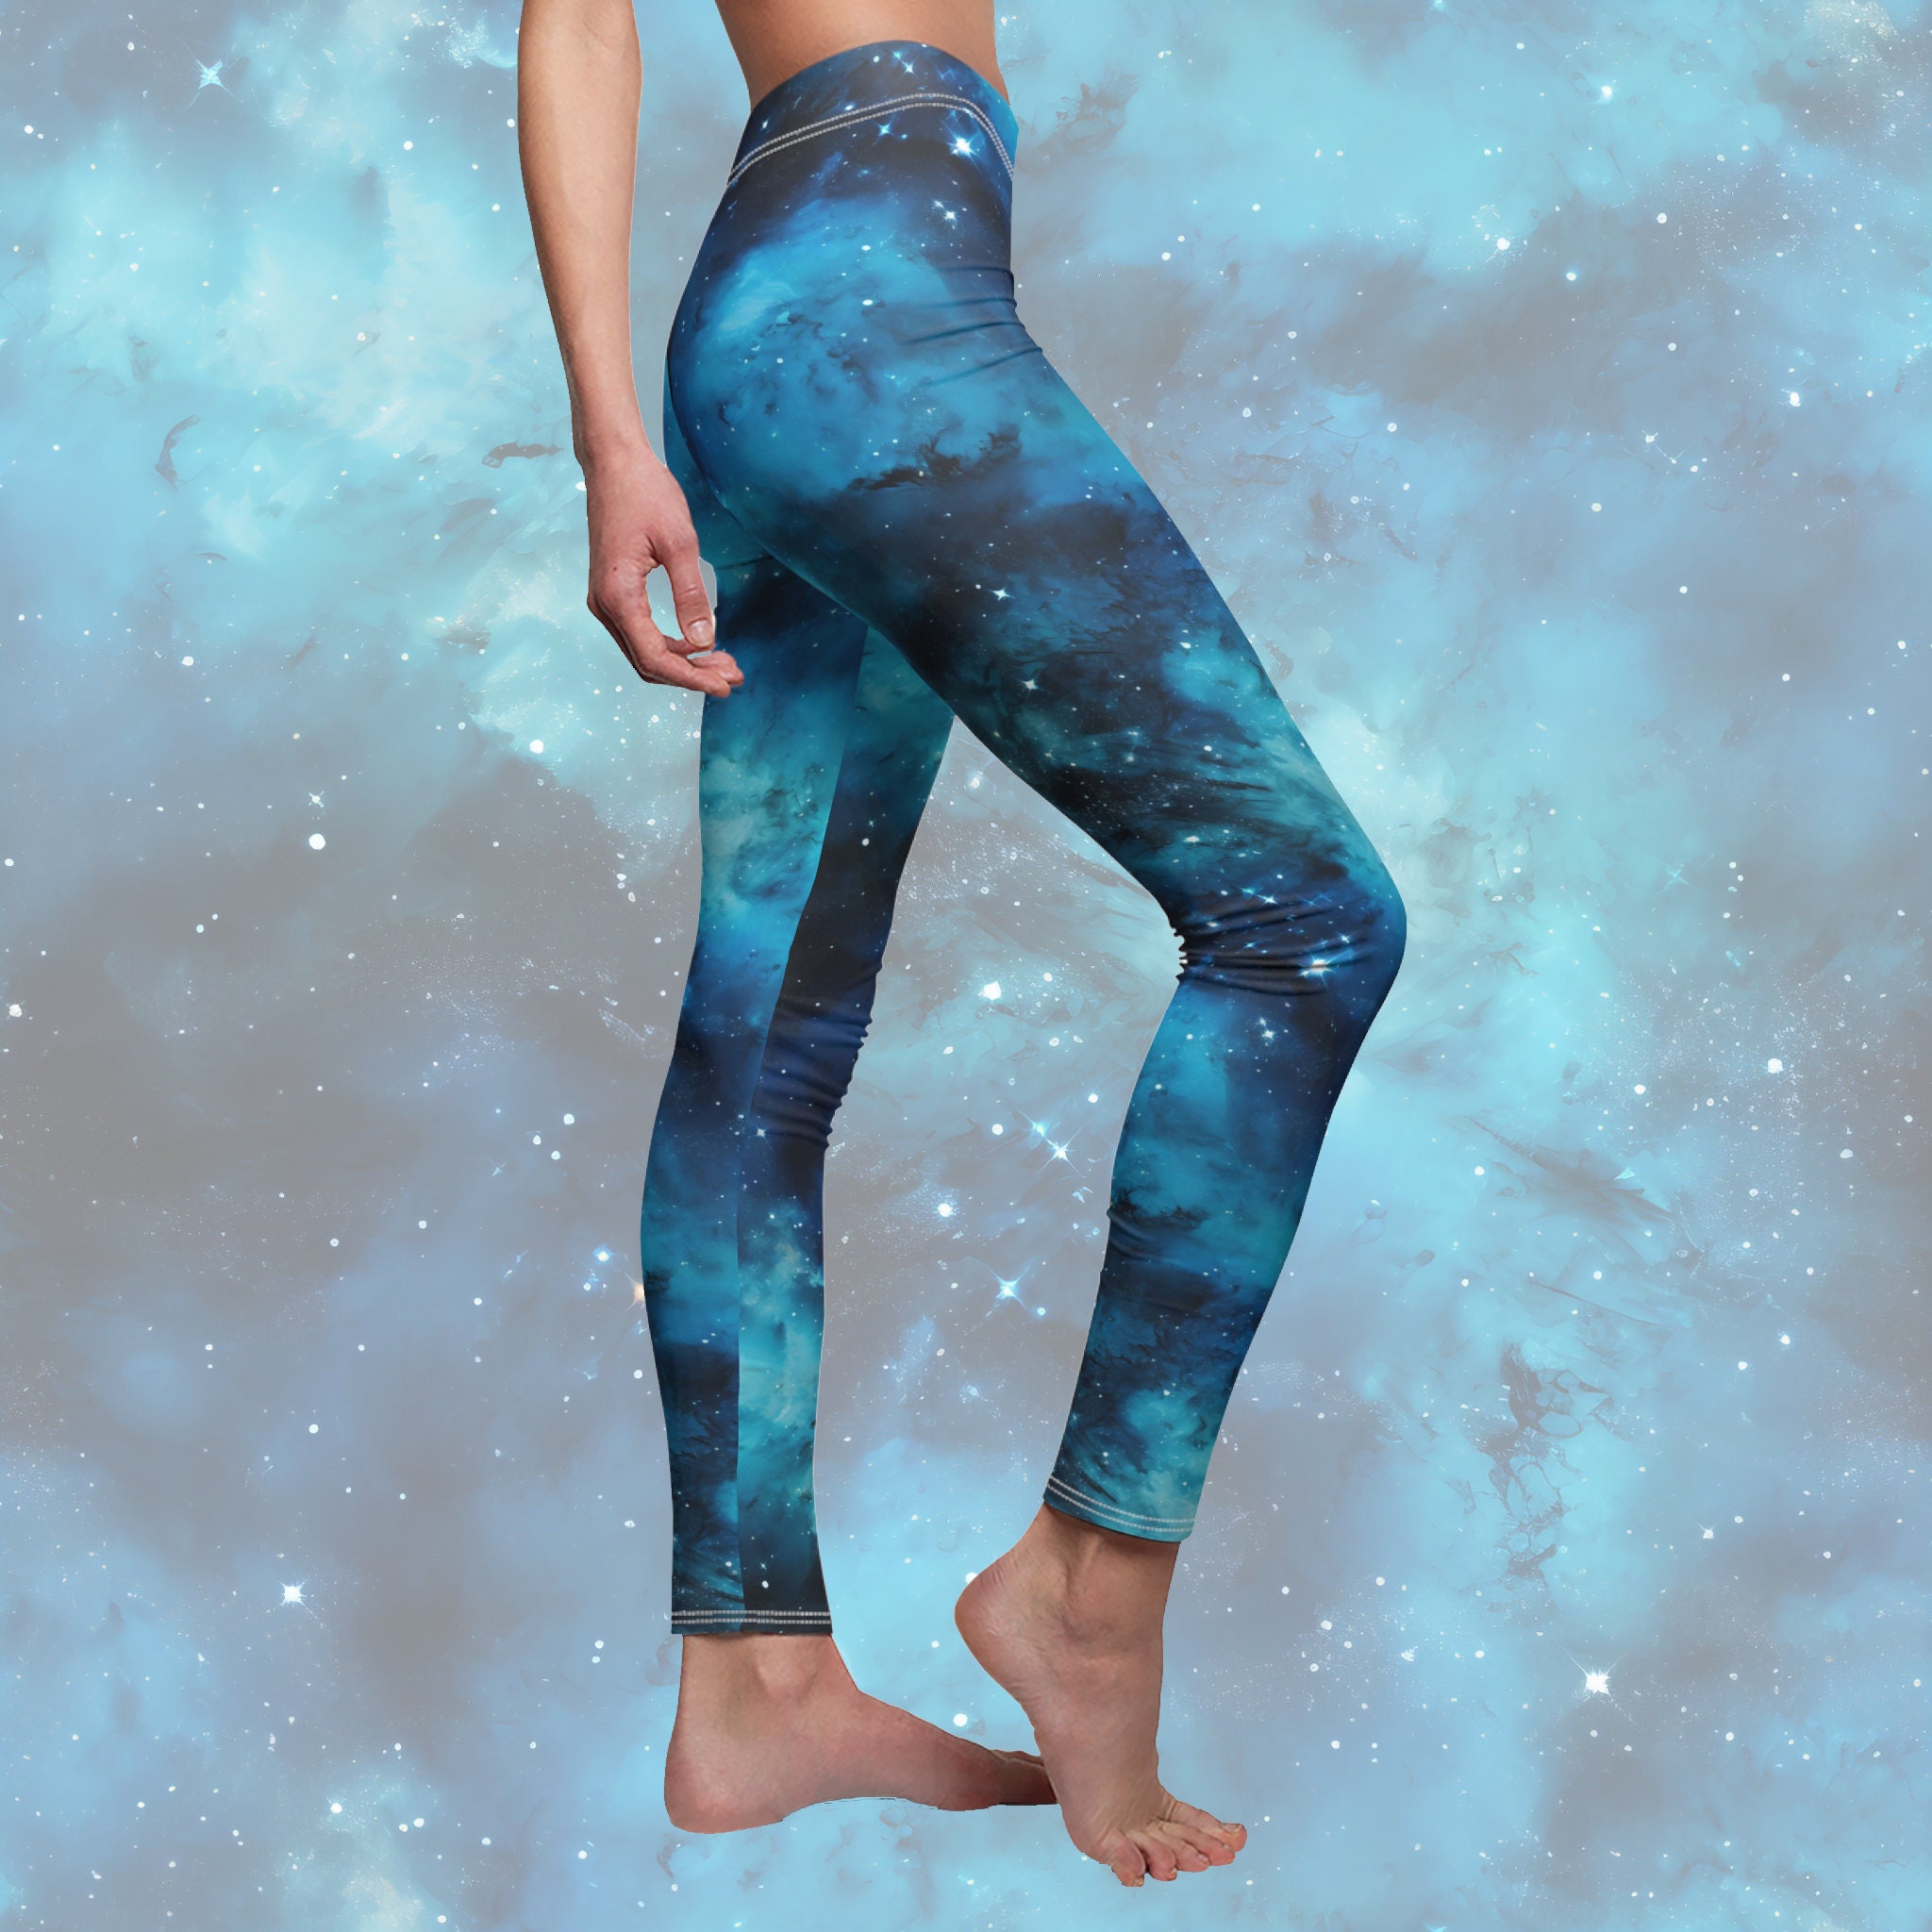 Cerulean Starscape Women's All-over Print Casual Leggings Galaxy-print  Leggings Spandex Yoga Pants Bottoms for Cosmic Queens 